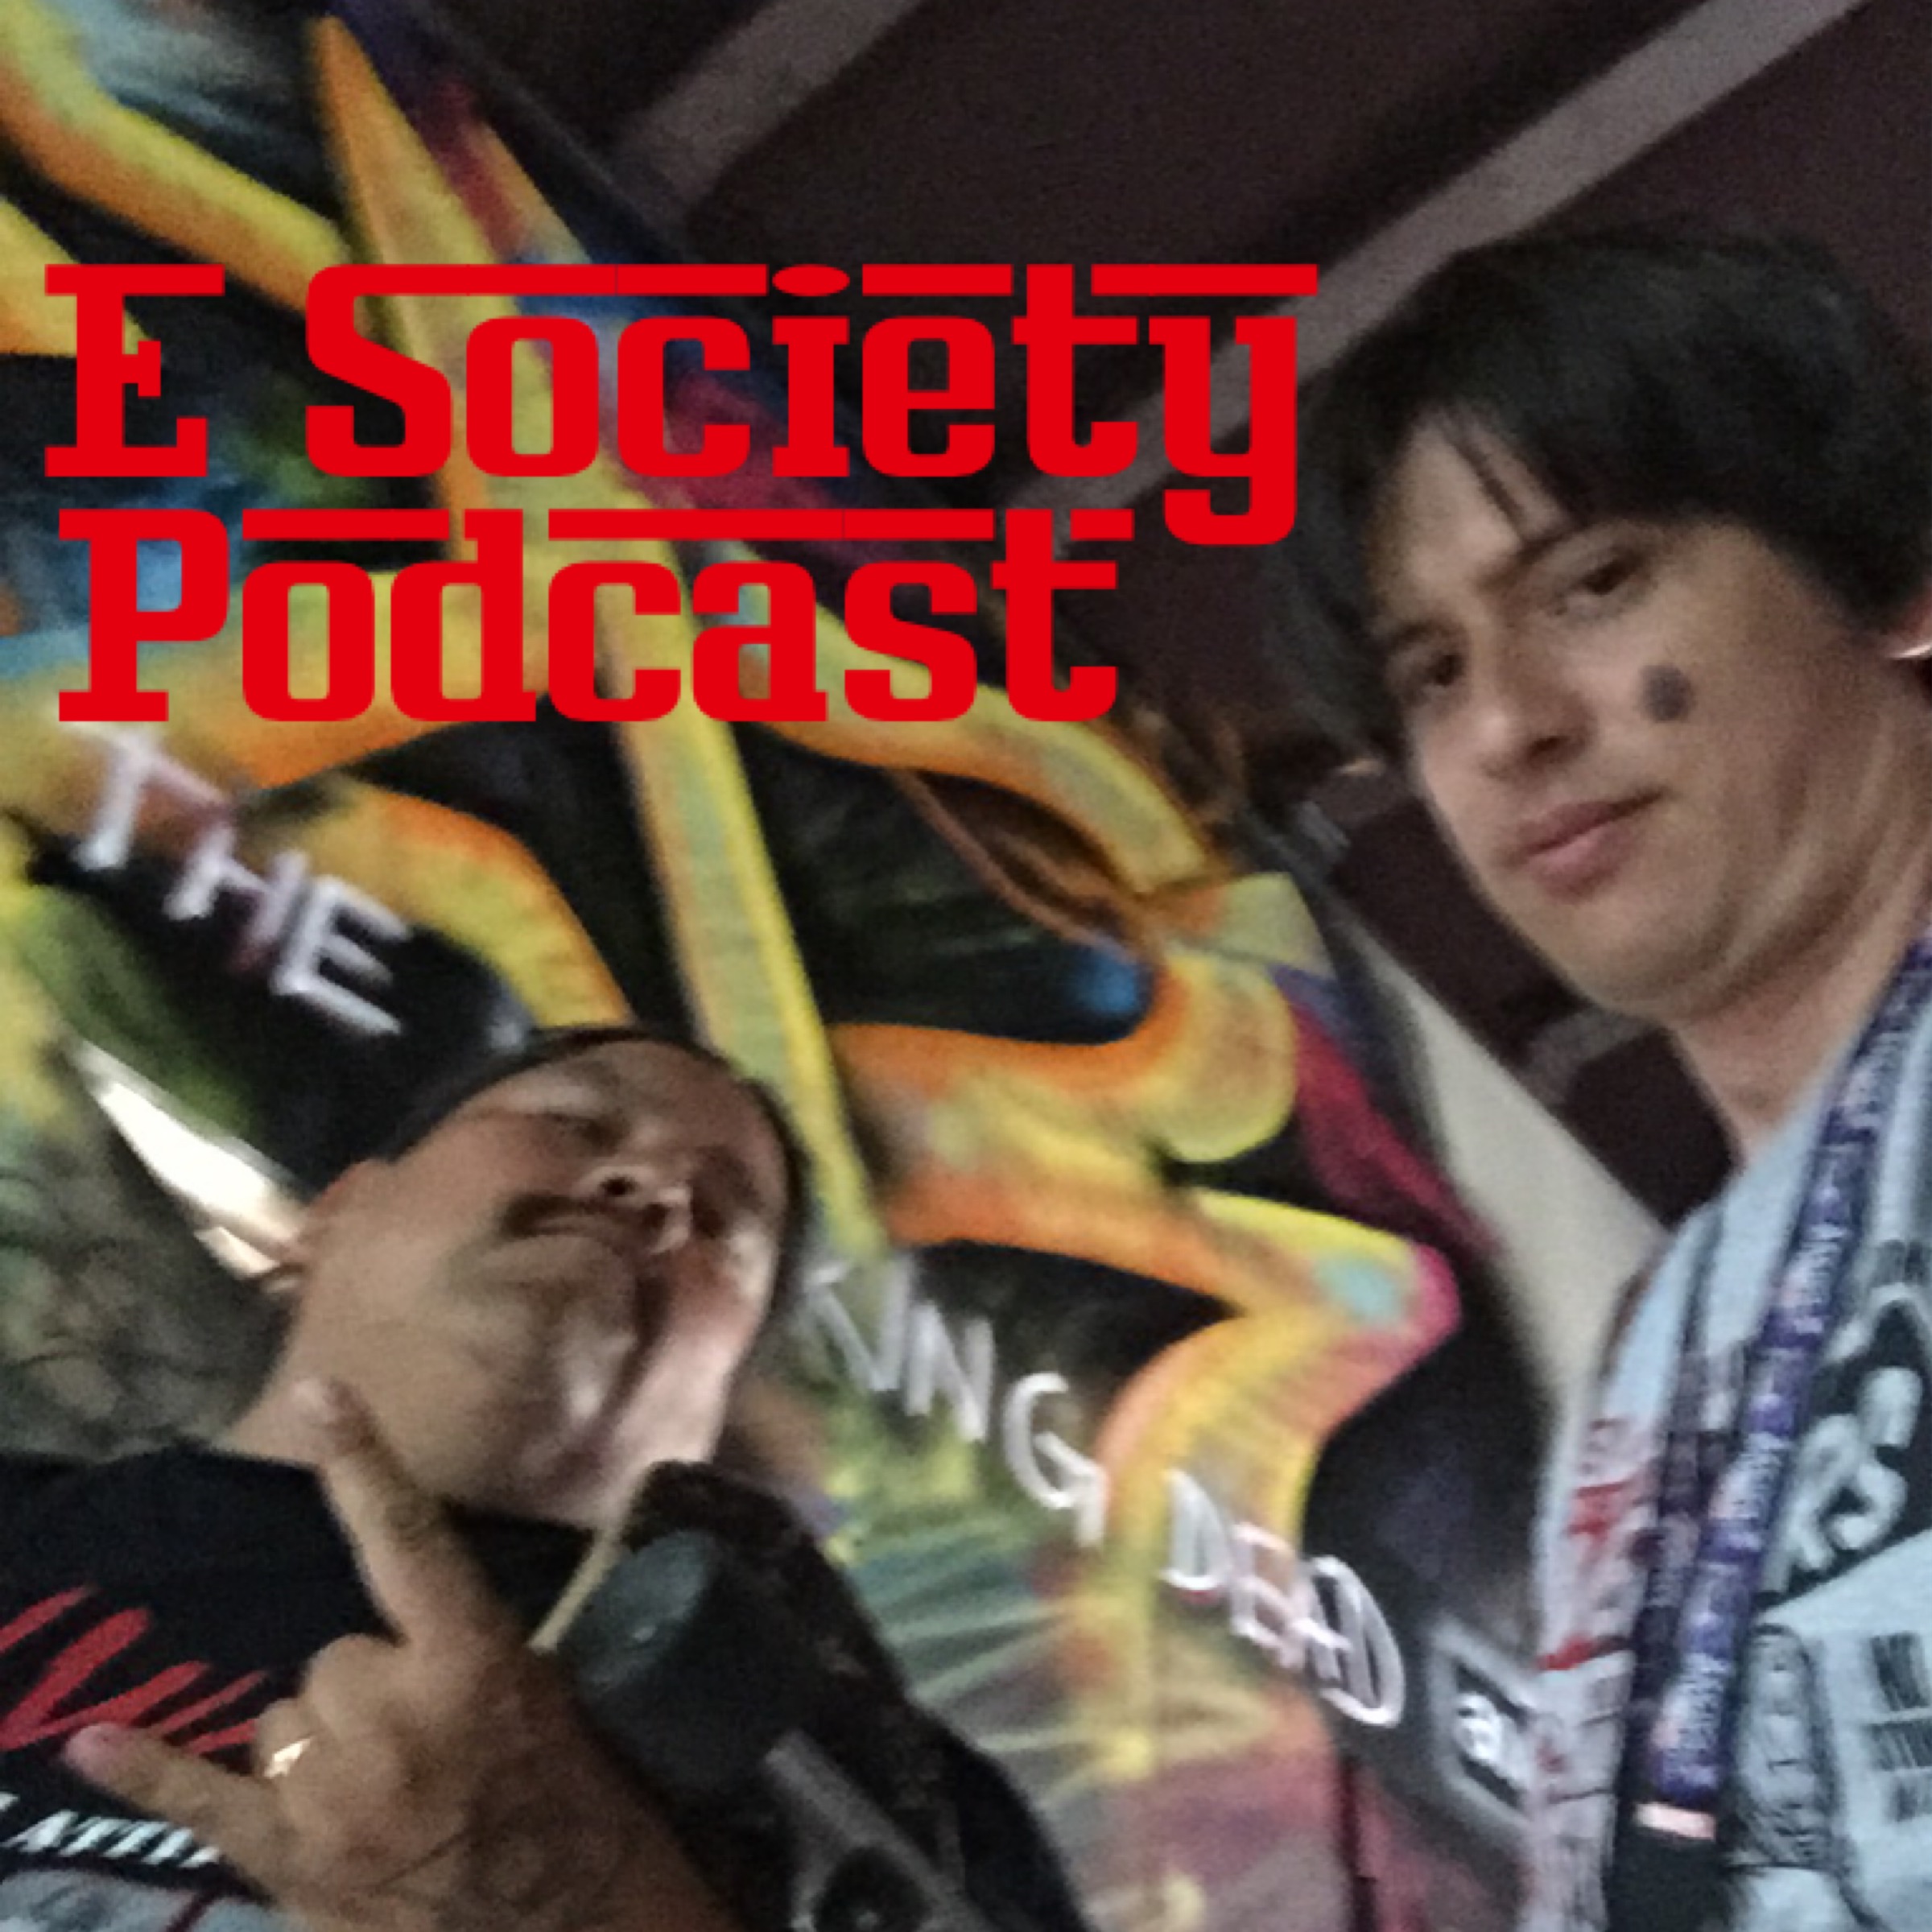 E Society Podcast - Ep. 59: It was GLORIOUS